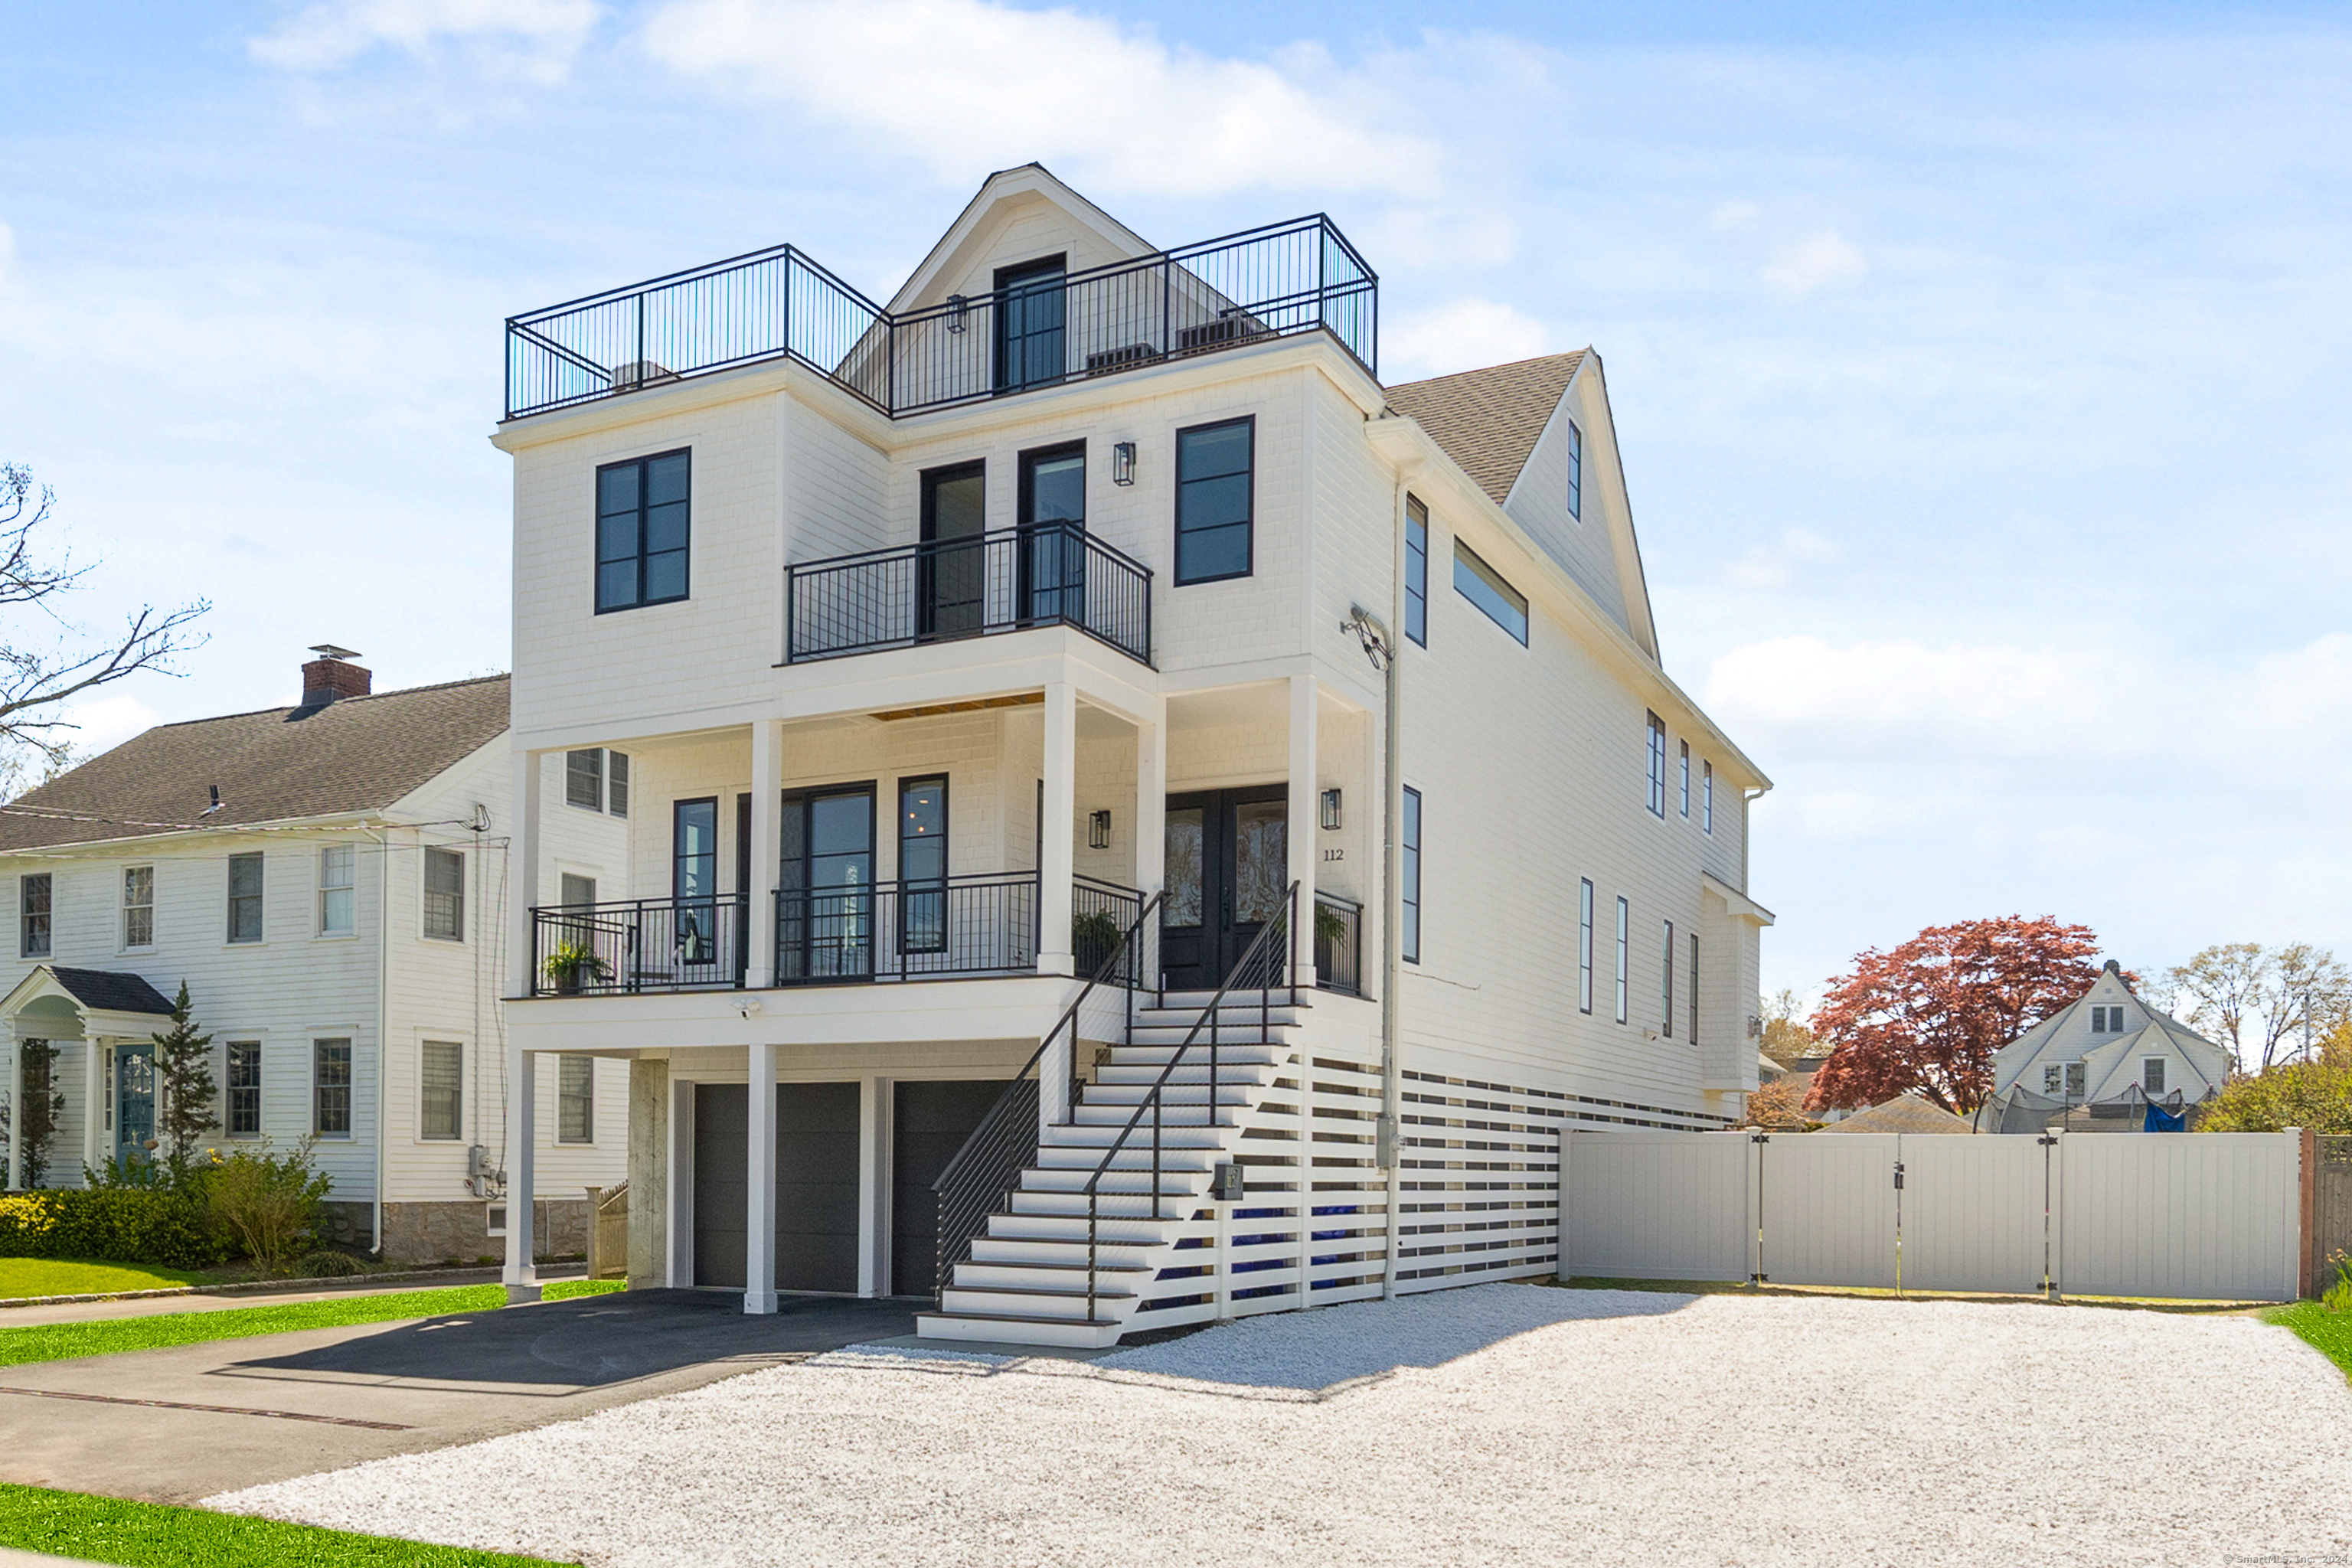 Step into the epitome of luxury coastal living in this architecturally stunning, sun-flooded California contemporary home set on oversized 1/4 acre dry lot in the heart of FFLD Beach--steps from town & Penfield Beach. This 5/6 BR beach haven boasts unmatched quality w/sensational glass railing staircase & hallways, 9-ft ceilings, 5" white oak floors throughout 3 floors & an abundance of oversized windows, glass doors & decks that bring the outdoors in. Central to this breathtaking home is the chef's dream kitchen, equipped w/a spectacular 10 ft waterfall quartz island, 48" paneled SUB-ZERO refrigerator, 48" Wolf double oven stove, walk-in pantry & custom wet bar w/sink & beverage fridge. Front porch, gorgeous formal living room, large dining room, casual breakfast area & family room w/gas fireplace & back deck create a seamless, airy 1st fl. flow. Upstairs, 5 BR including primary suite w/soaring vaulted ceilings, huge deck & sublime, spa-like bath w/enormous marble shower & radiant heated floors. 4 add'l generously sized BR, 2 BA & laundry room w/cabinetry complete the 2nd level. 3rd level w/full bath & deck w/soaring views offers endless possibilities for playroom, 6th BR, gym, office or combination. Lower level loggia overlooks huge lot w/endless possibilities & pool permit in place. Oversized garage, GENERAC FULL home generator, outdoor shower, gas/sewer. This is your chance to live your best life at the BEACH!